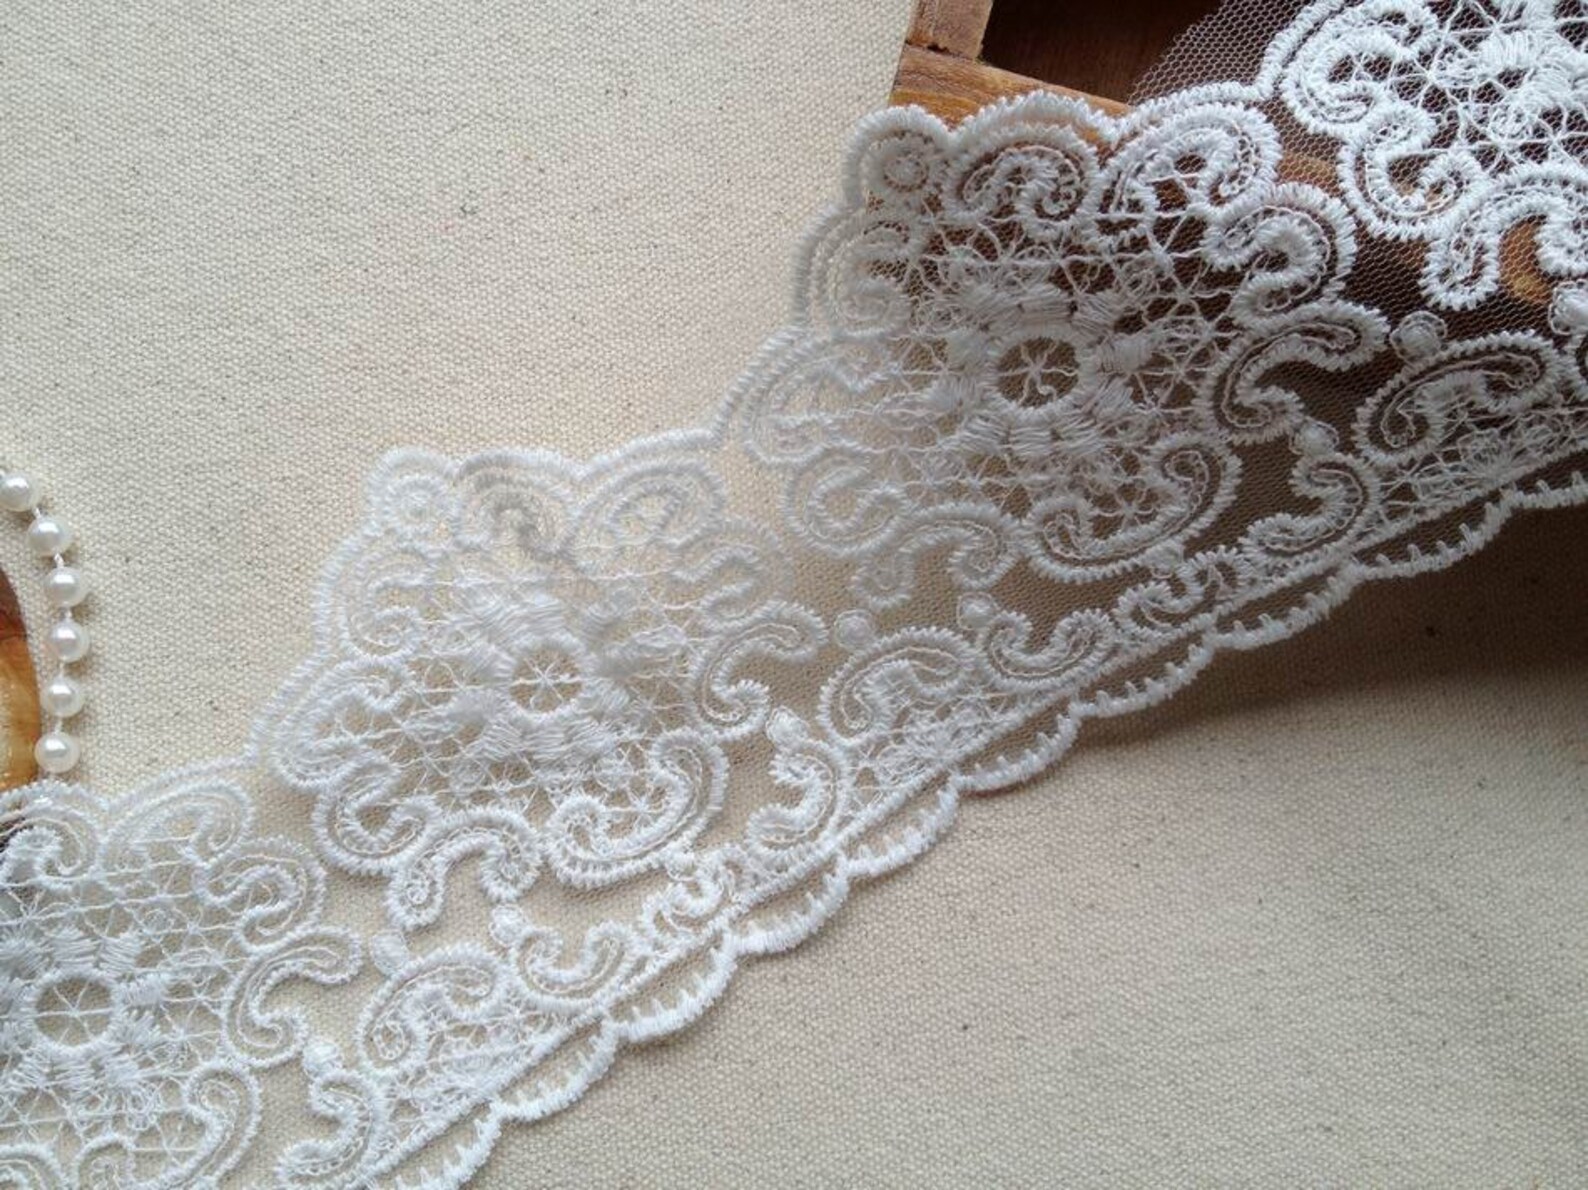 Off White Scalloped Embroidery Lace Trim Bridal Wedding Lace | Etsy